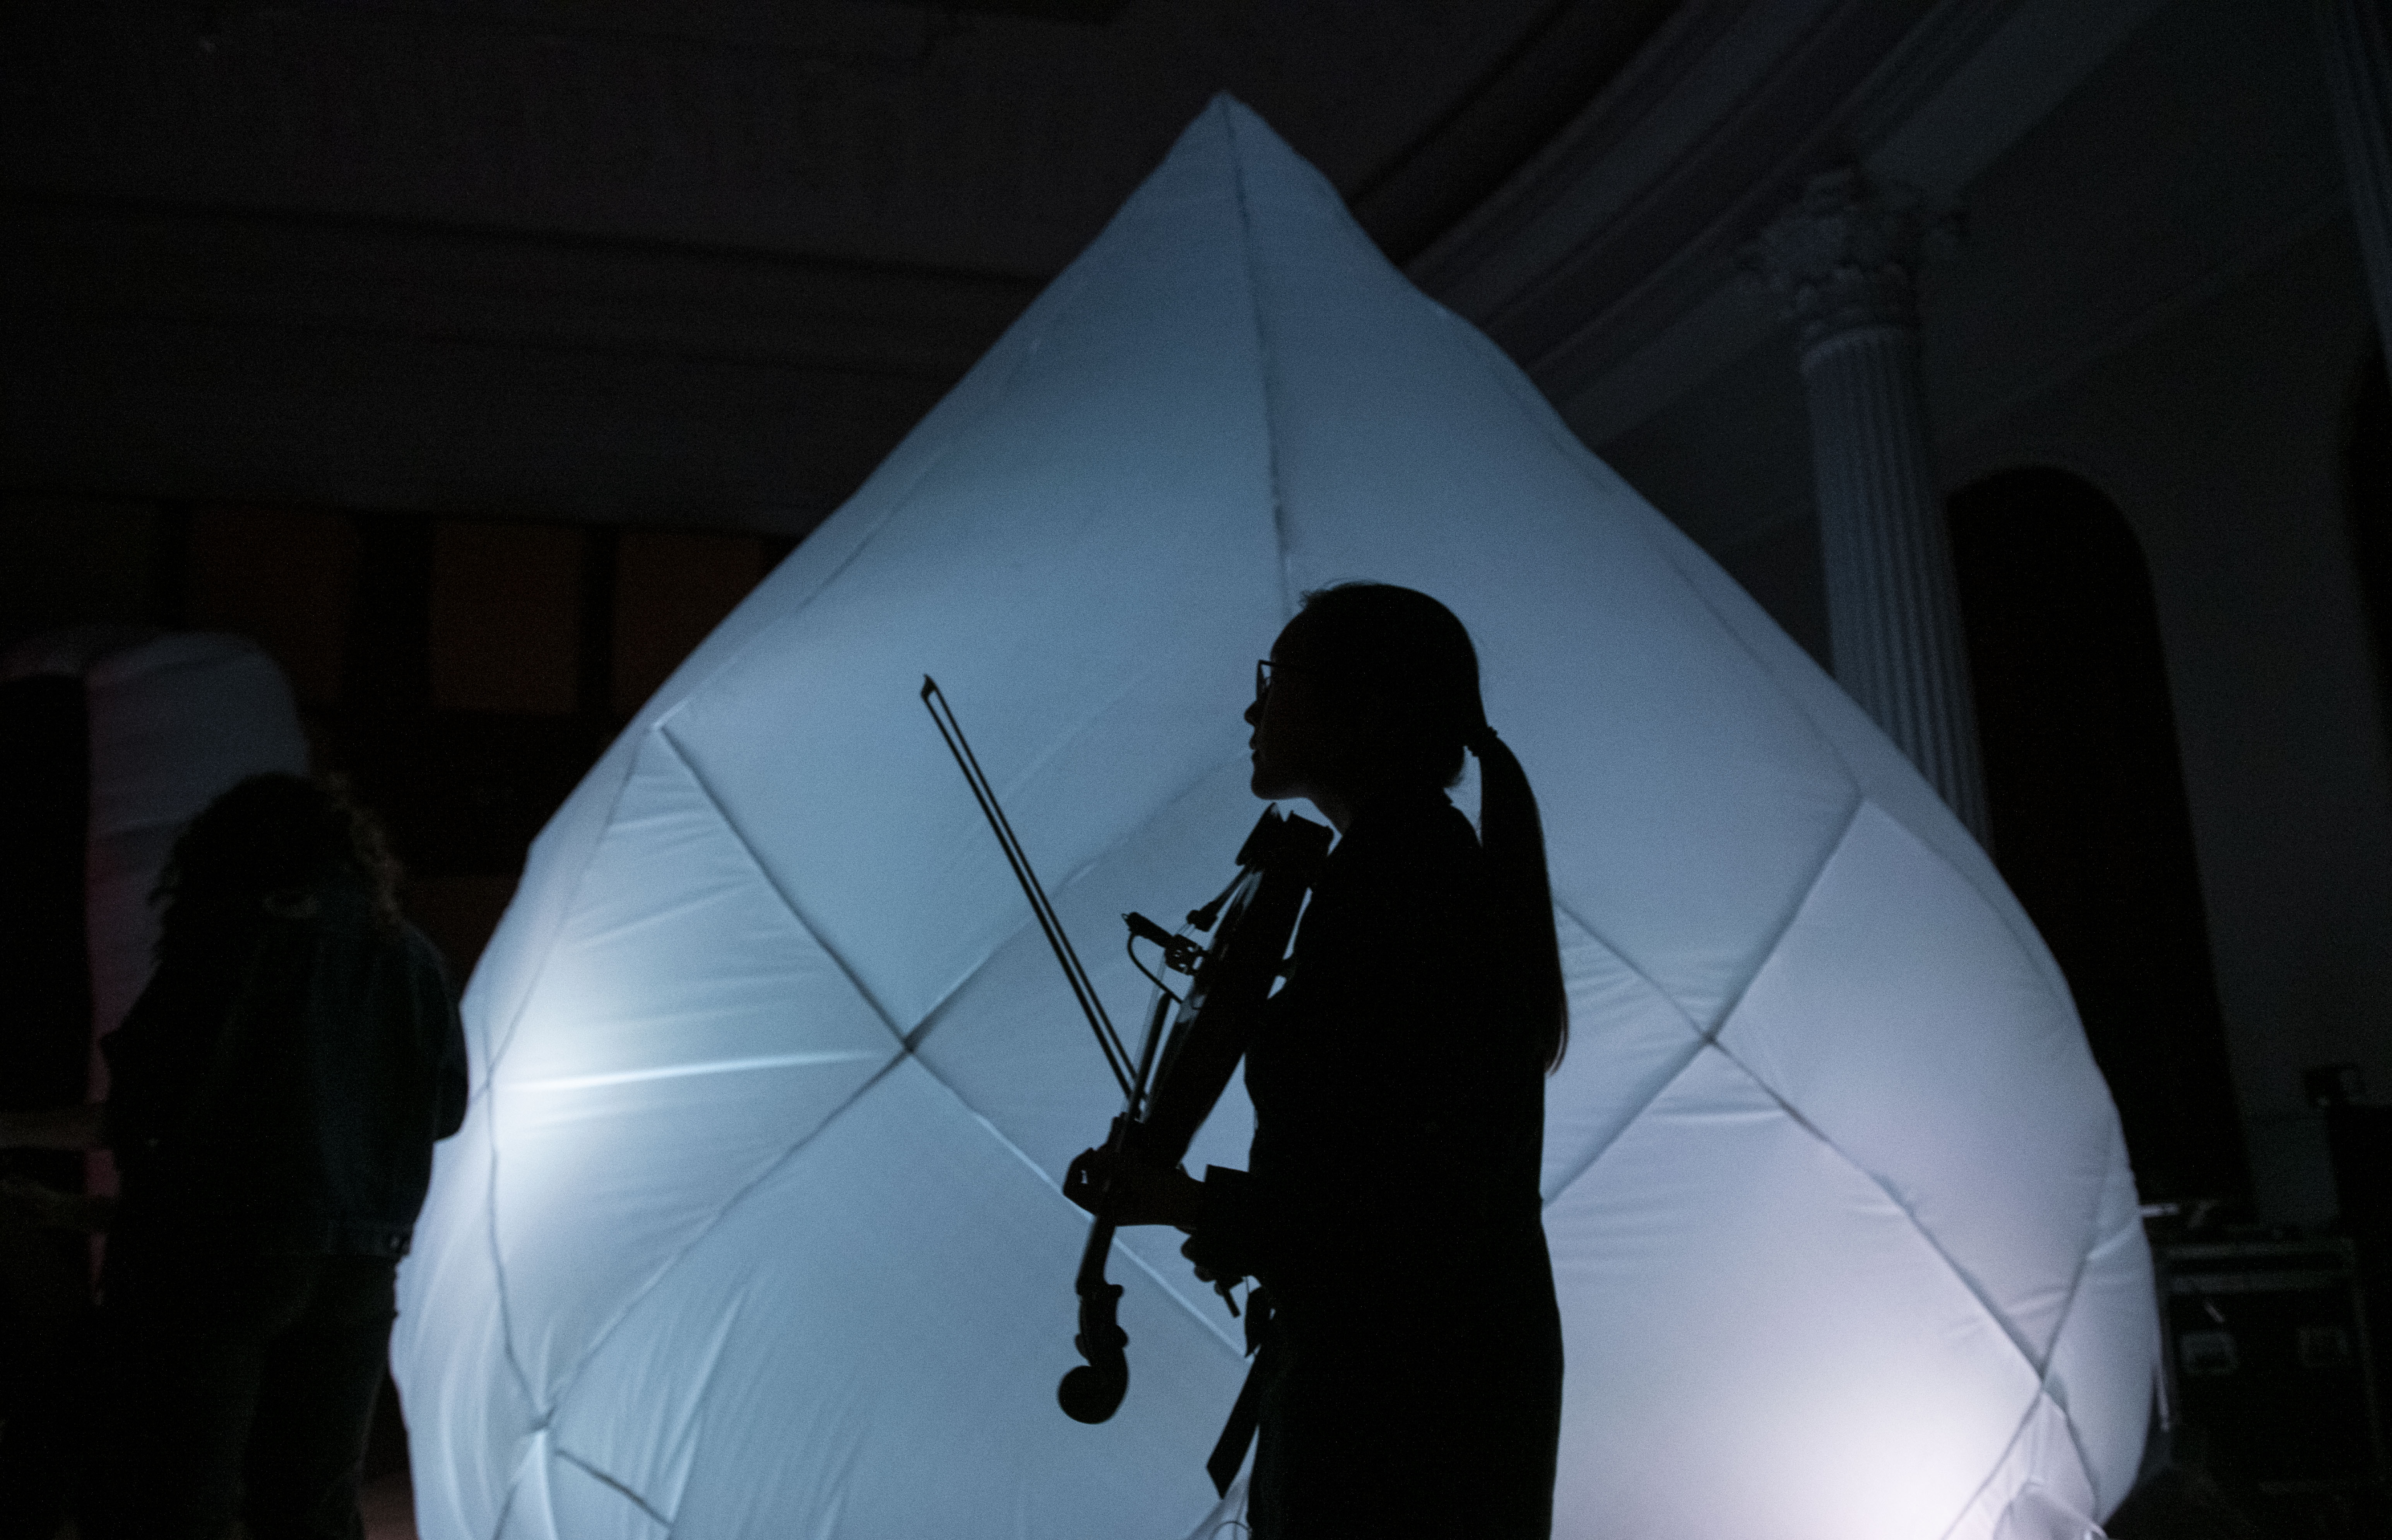 Student holding violin in front of inflatable sculpture